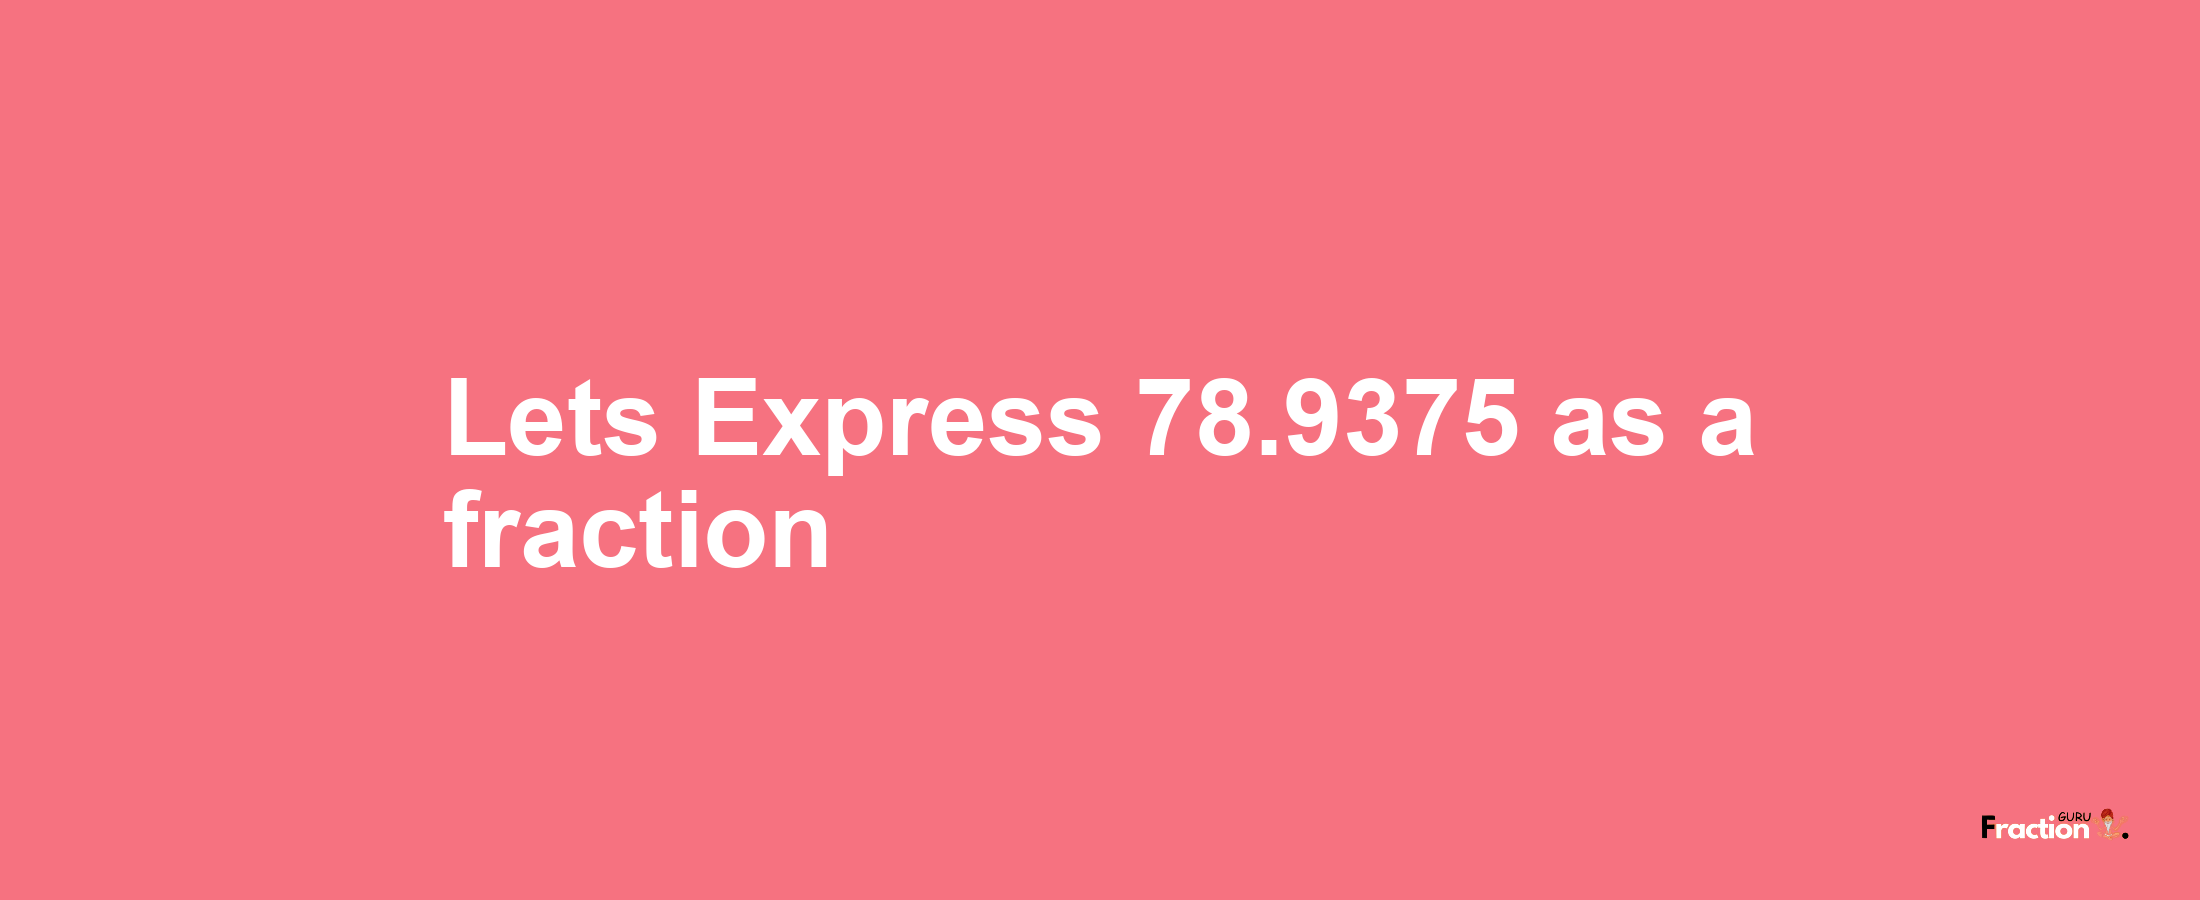 Lets Express 78.9375 as afraction